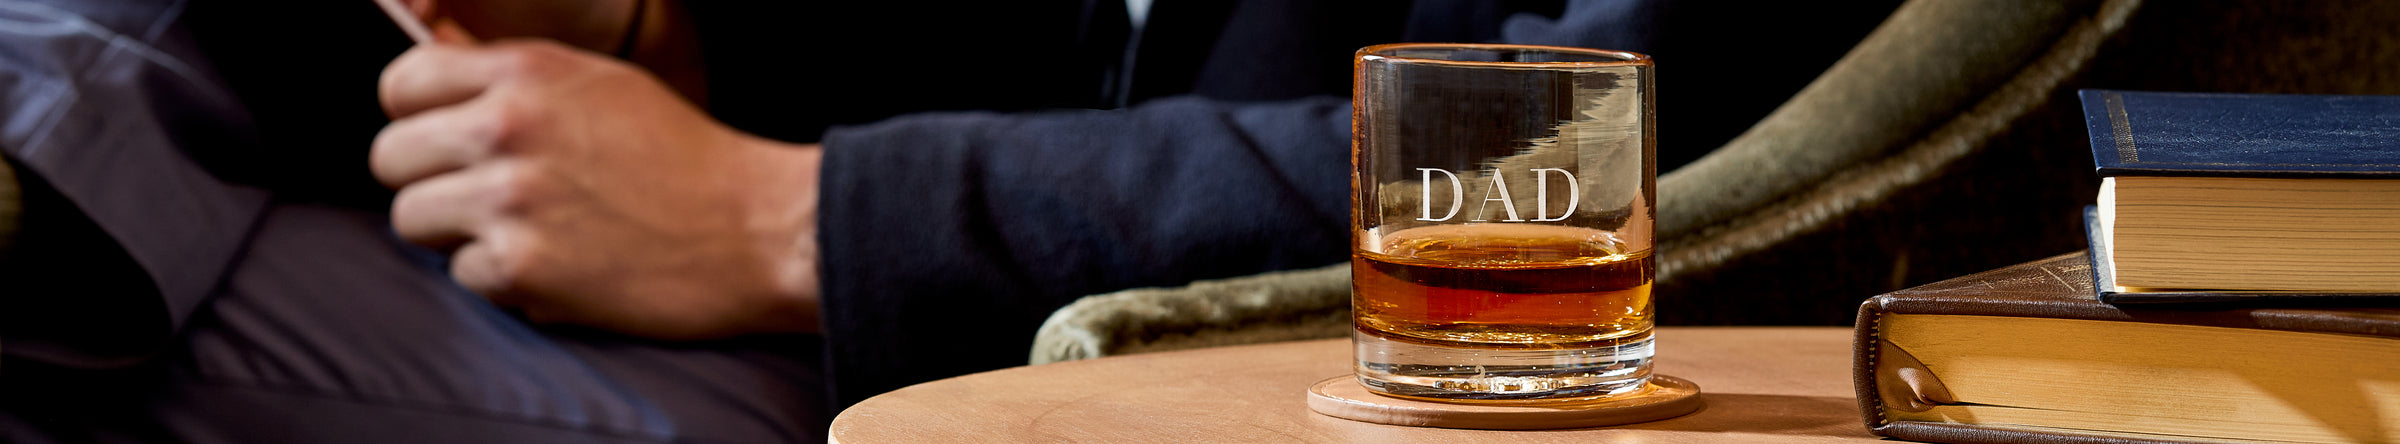 courage, whiskey, and dream hand-blown lowball drinking glass